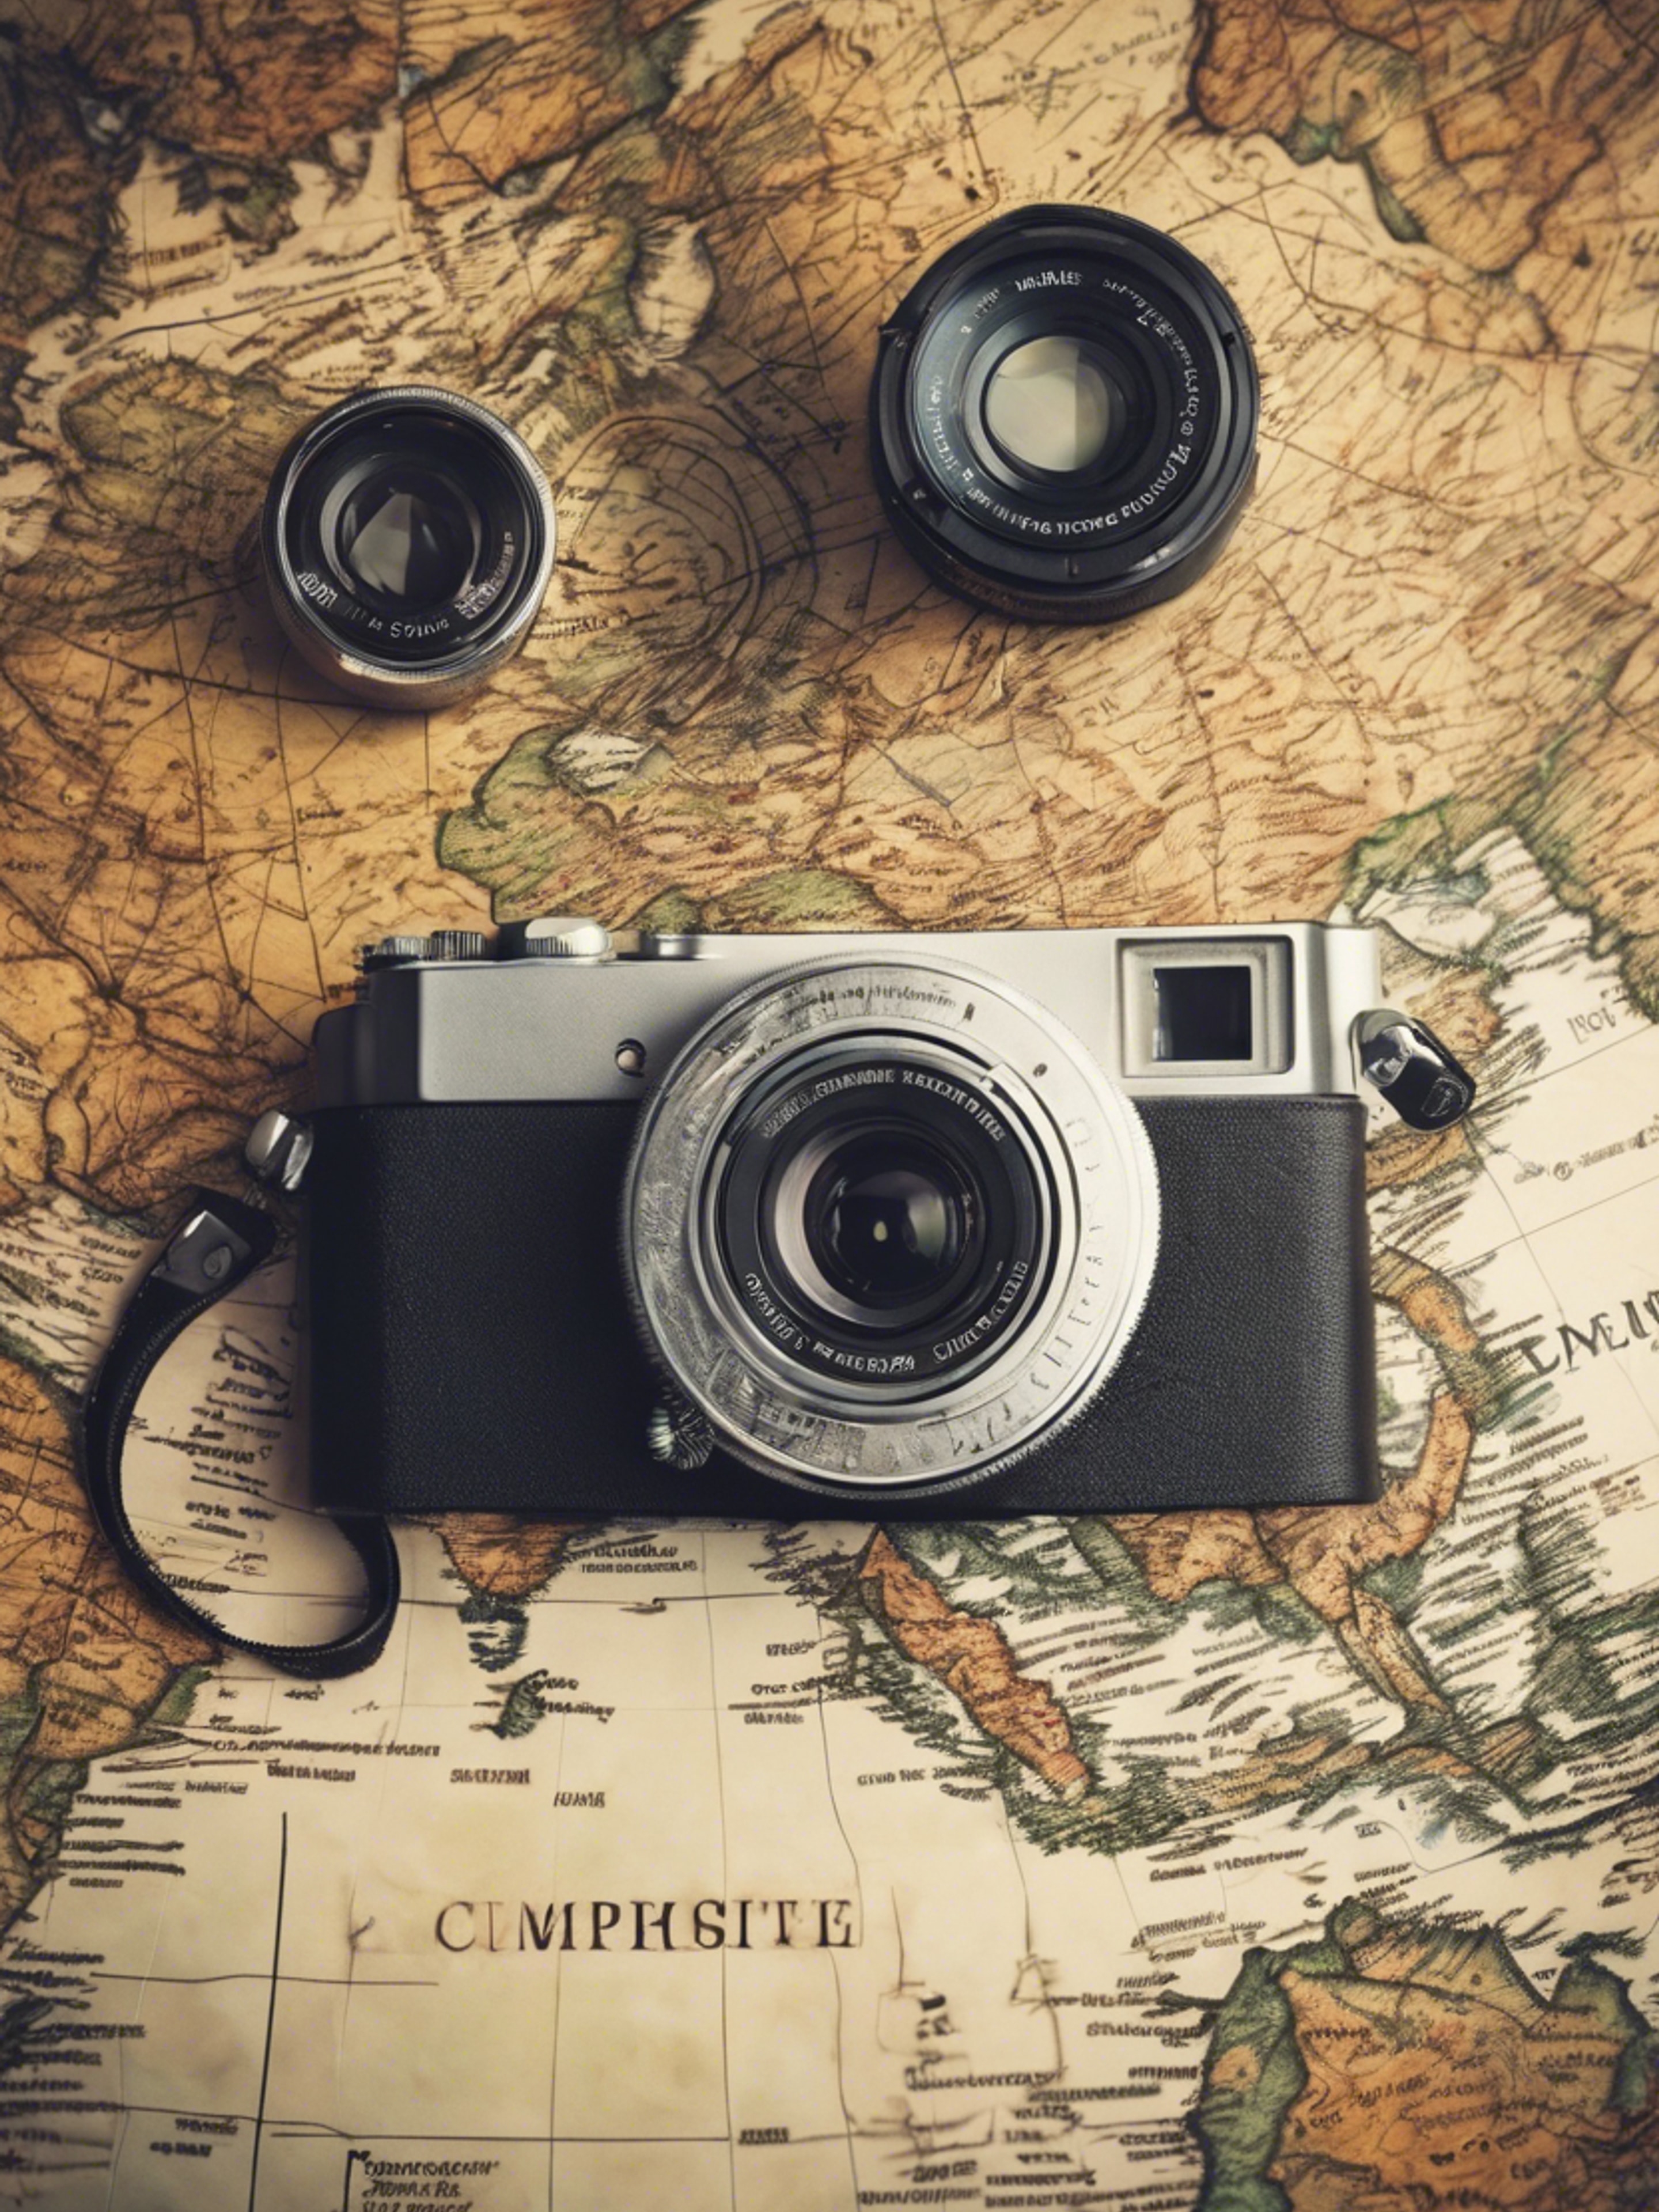 A compact camera with vintage design, placed on a world map to convey the spirit of travel. Tapeet[89e32525bdc346769ef4]